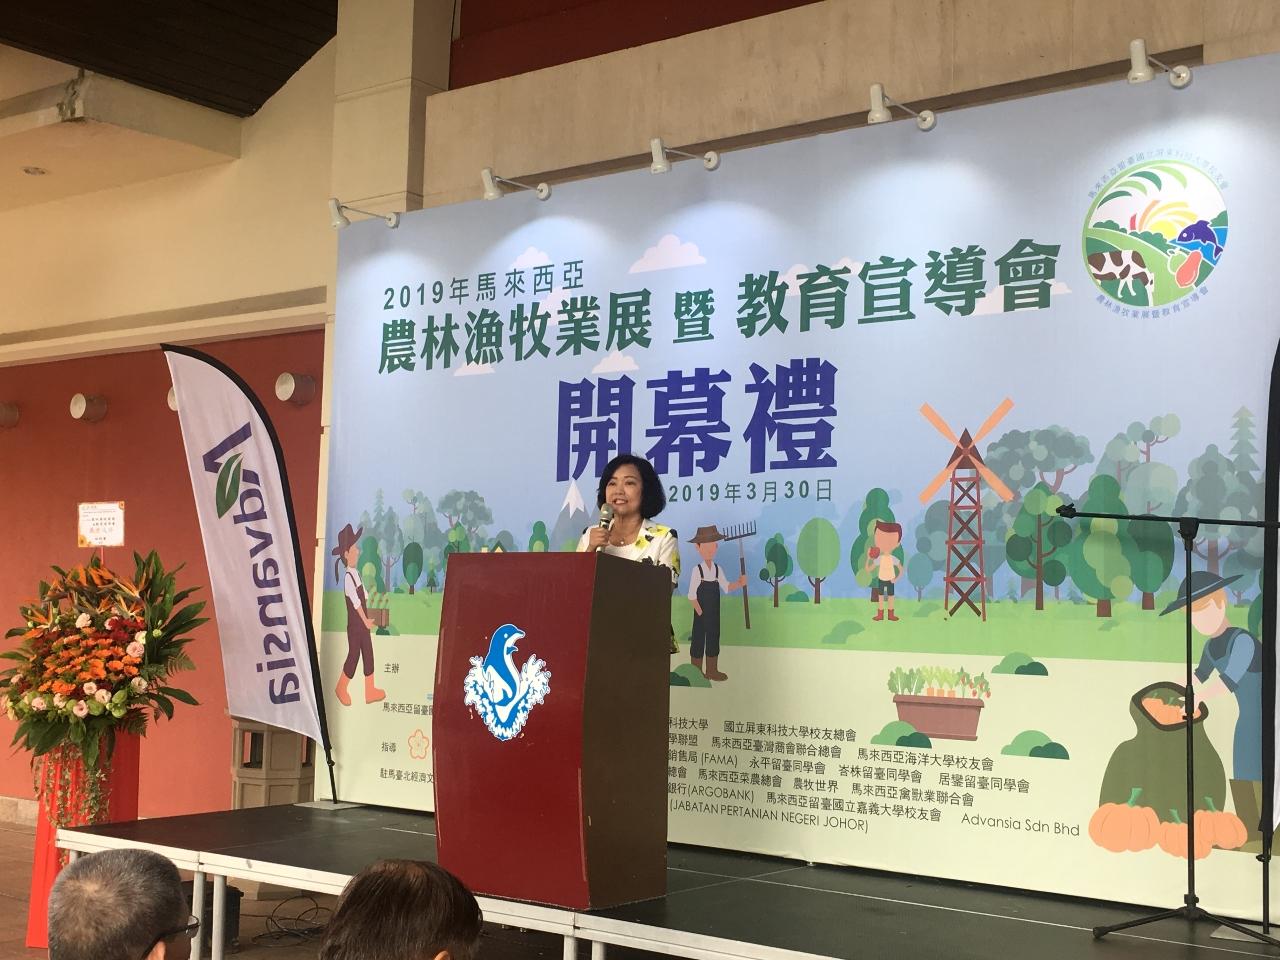 Representative Anne Hung delivers a speech at opening ceremony of the 2019 Malaysia Agriculture, Forestry, Fisheries and Animal Husbandry Exhibition and Admission seminar hosted by National Pingtung University of Science &amp; Technology Taiwan Alumni Association Malaysia.